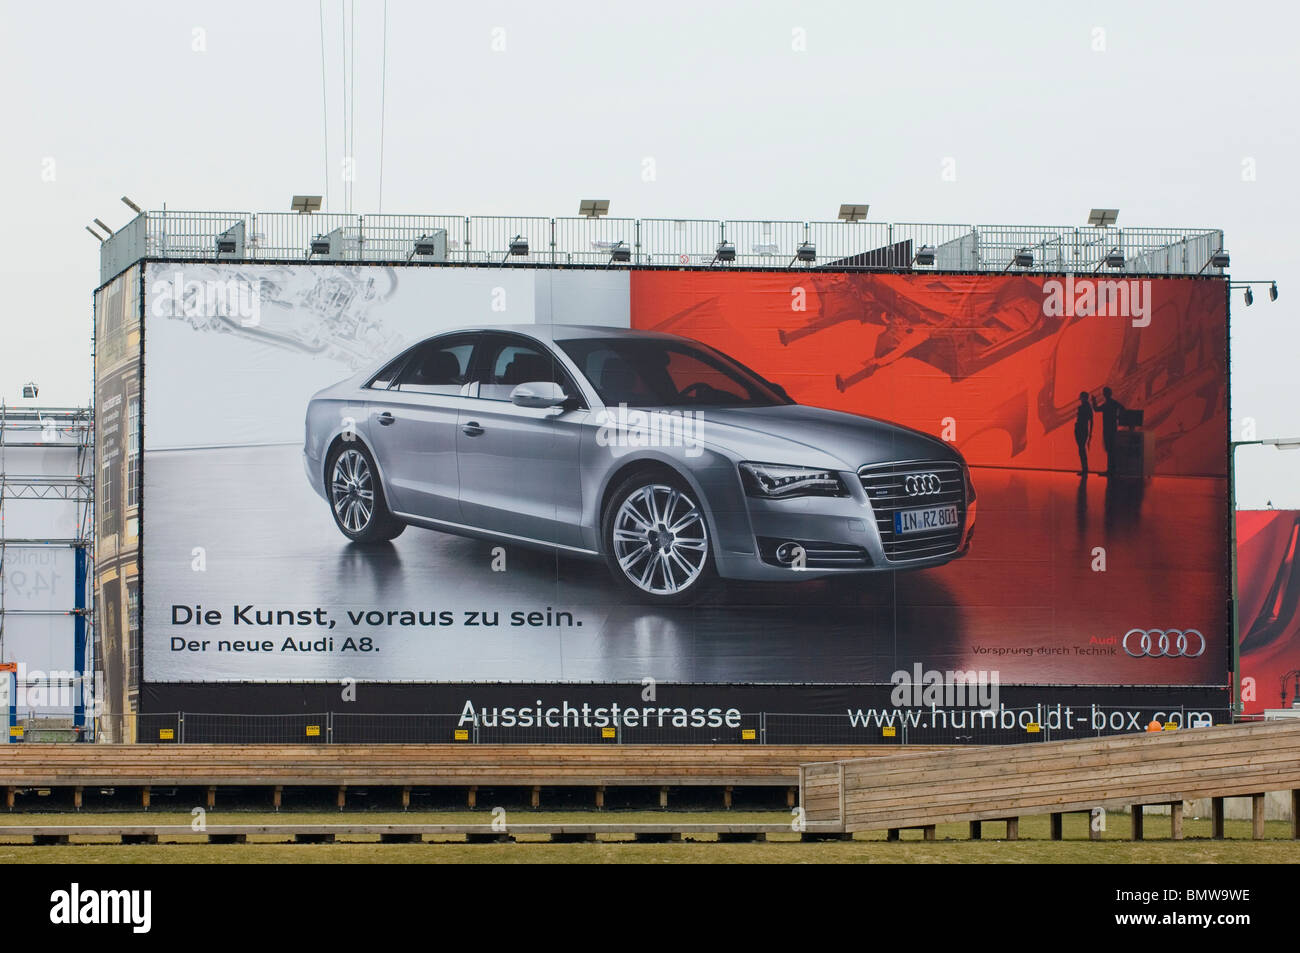 Advertising the new Audi A8 on billboard Berlin Germany Stock Photo